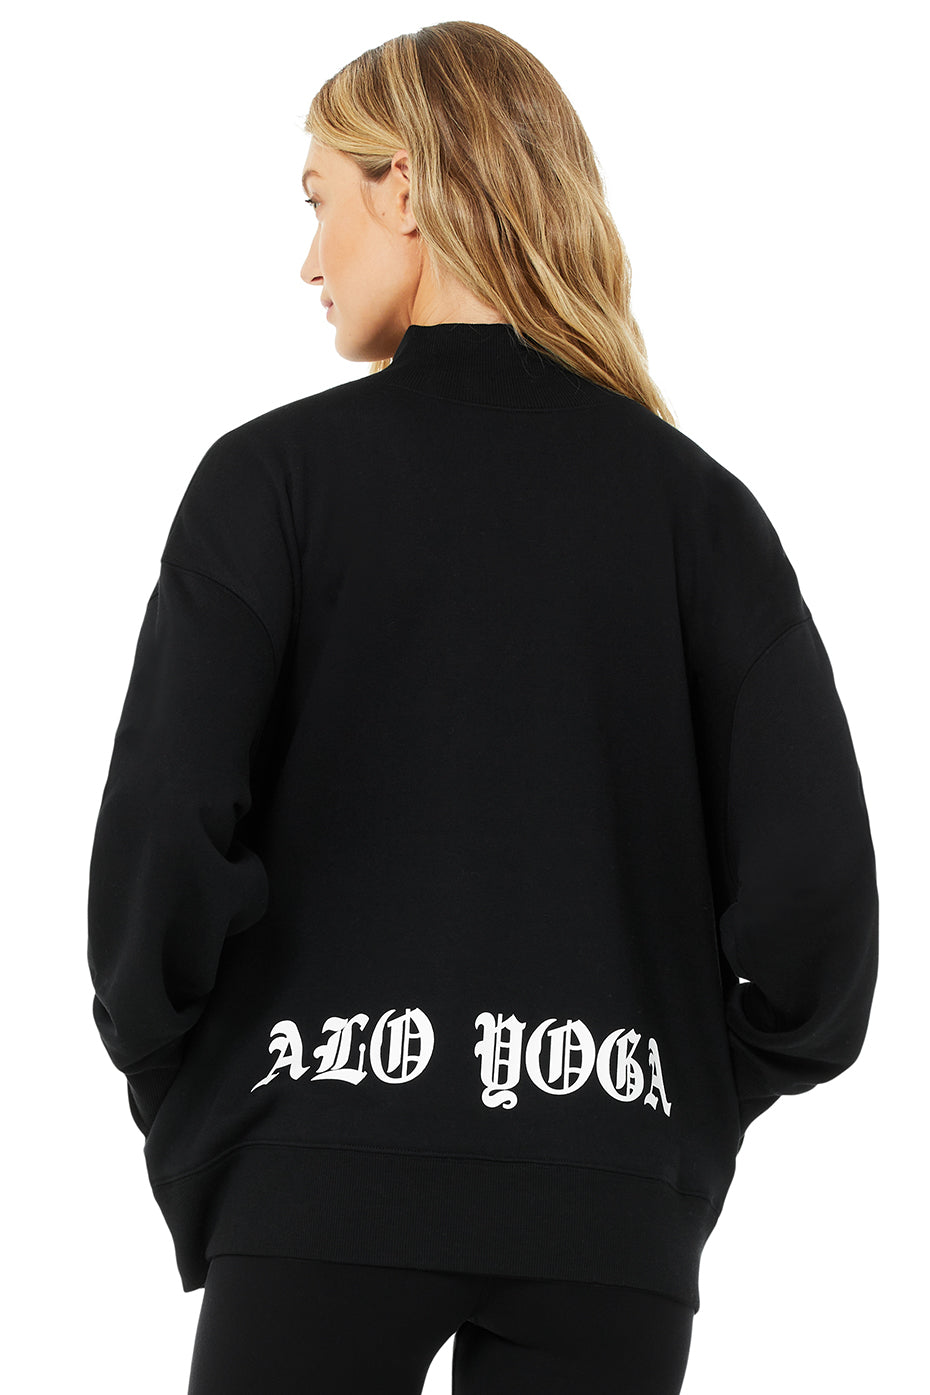 Graphic Refresh Pullover Top in Black/White by Alo Yoga